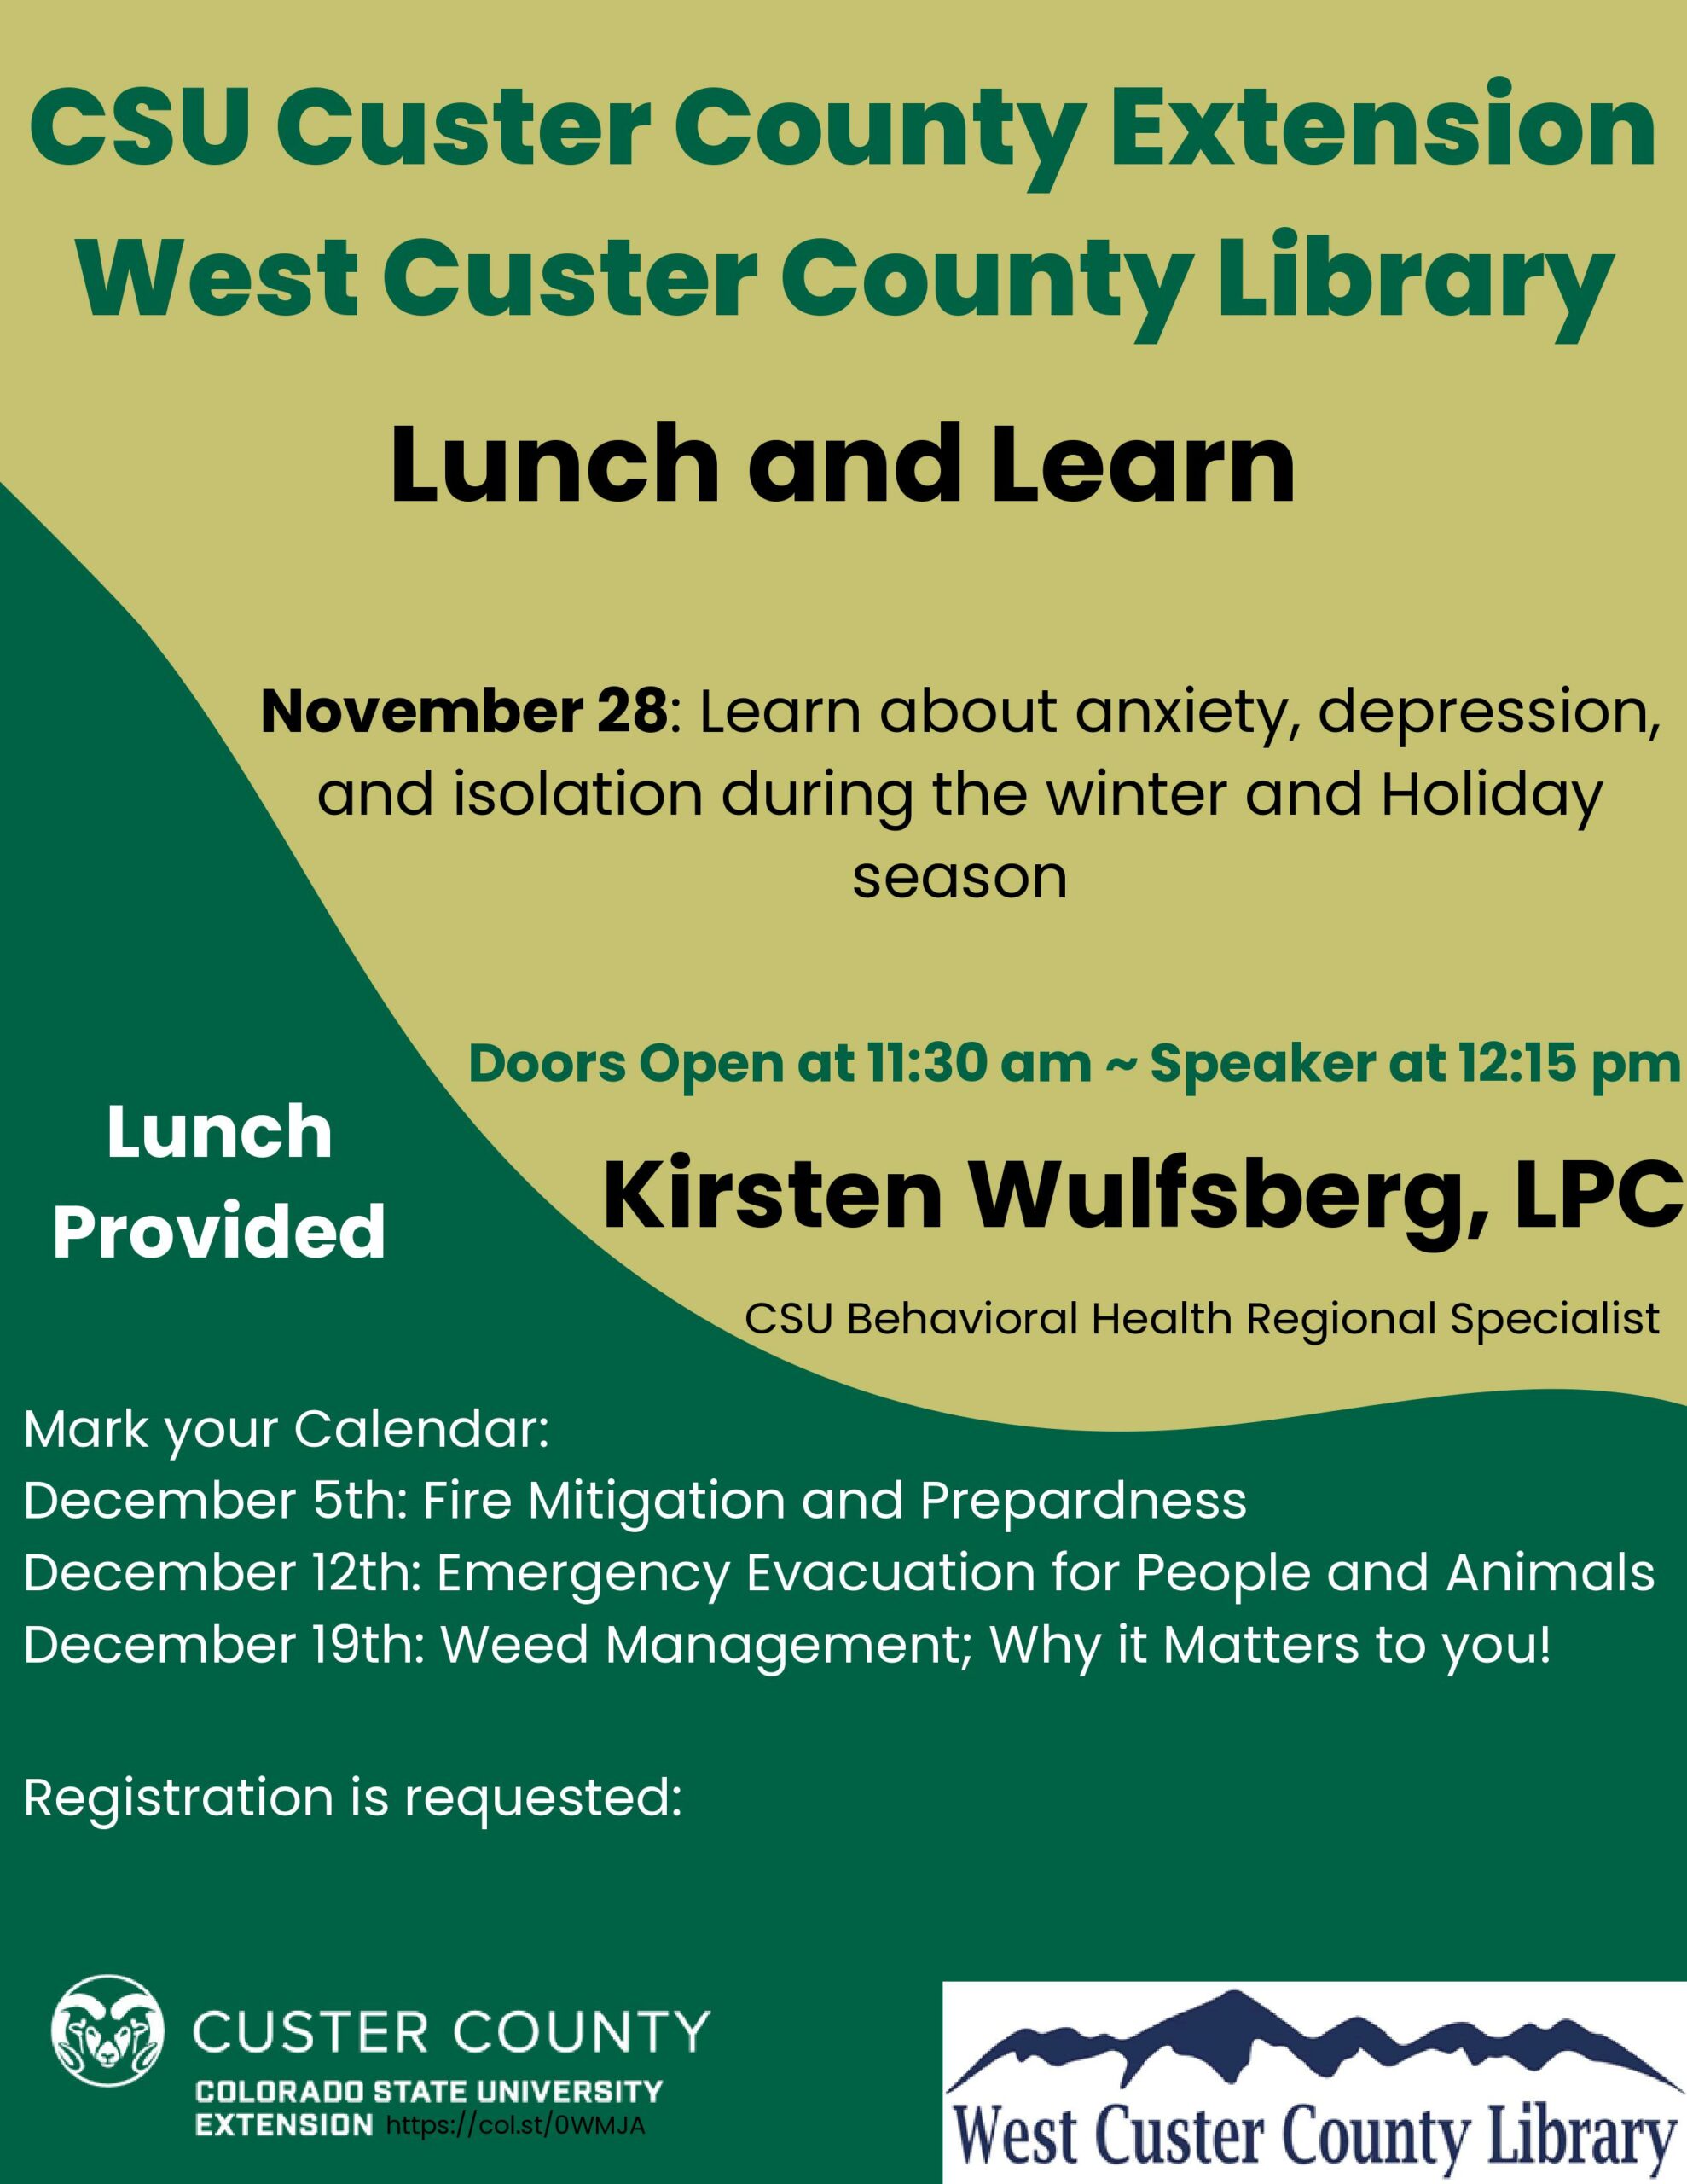 CSU Custer County Extension Offers Lunch & Learn Series